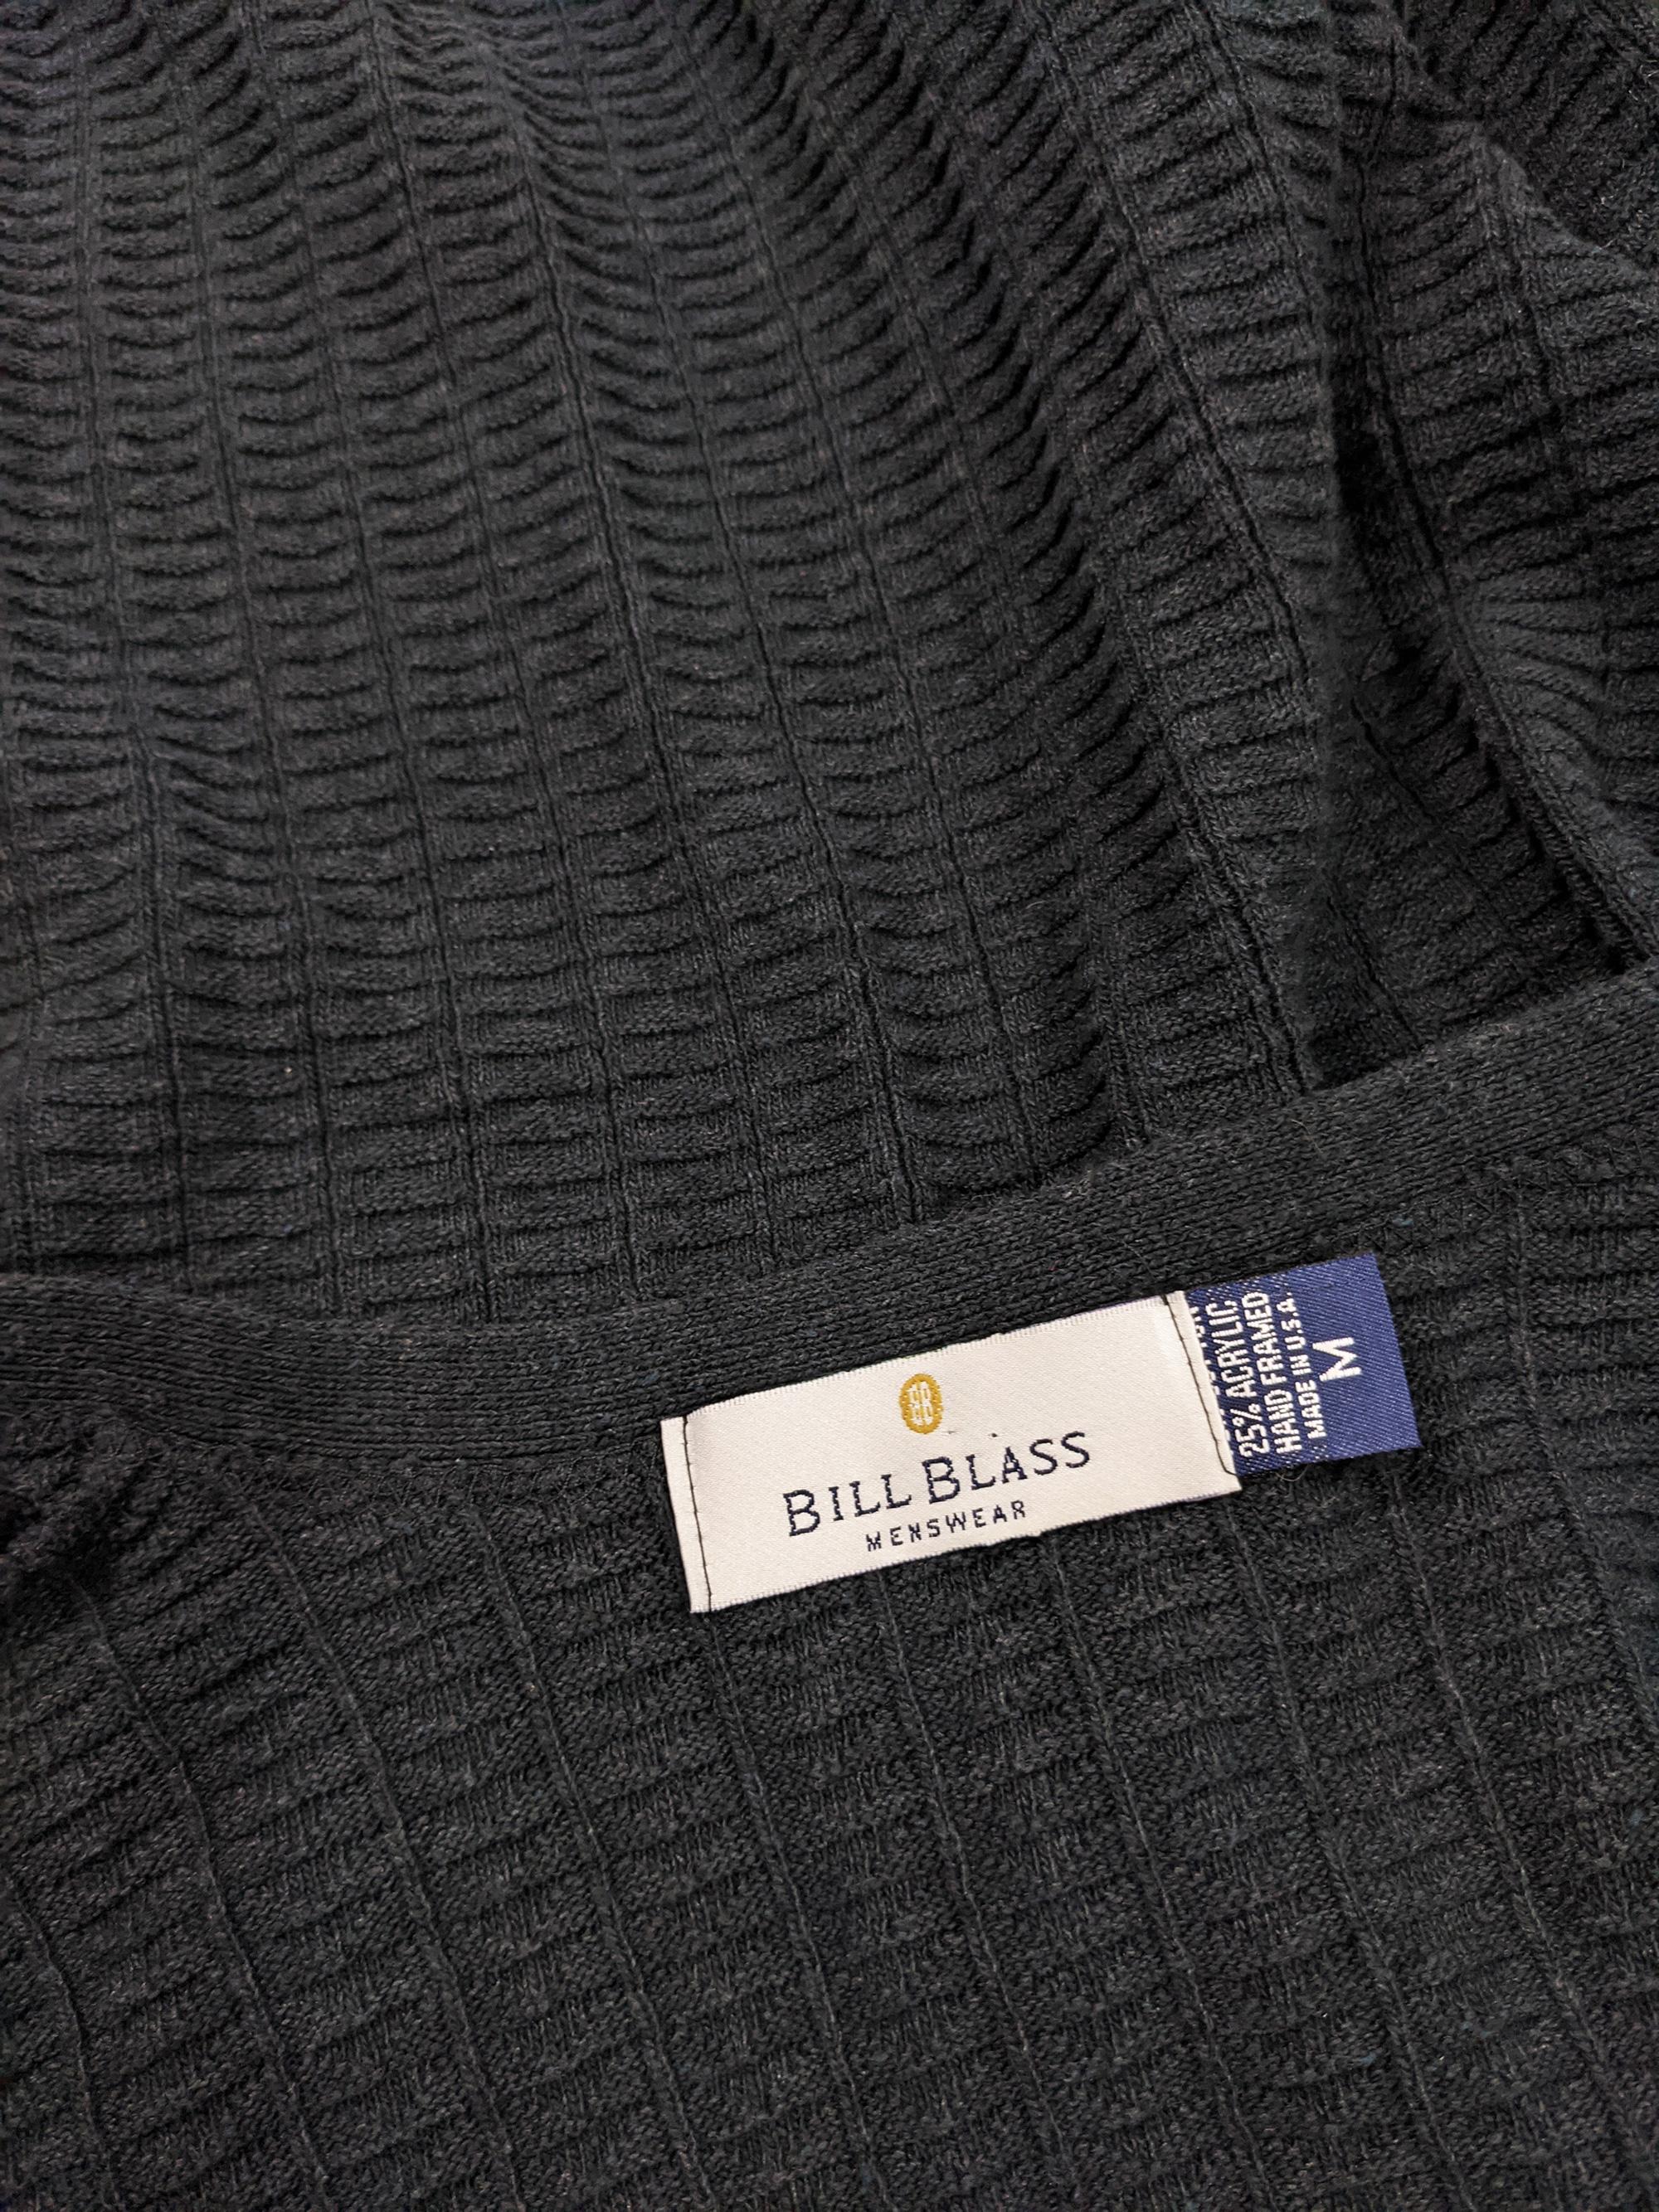 Bill Blass Vintage Mens Waffle Knit Cardigan Sweater In Excellent Condition In Doncaster, South Yorkshire